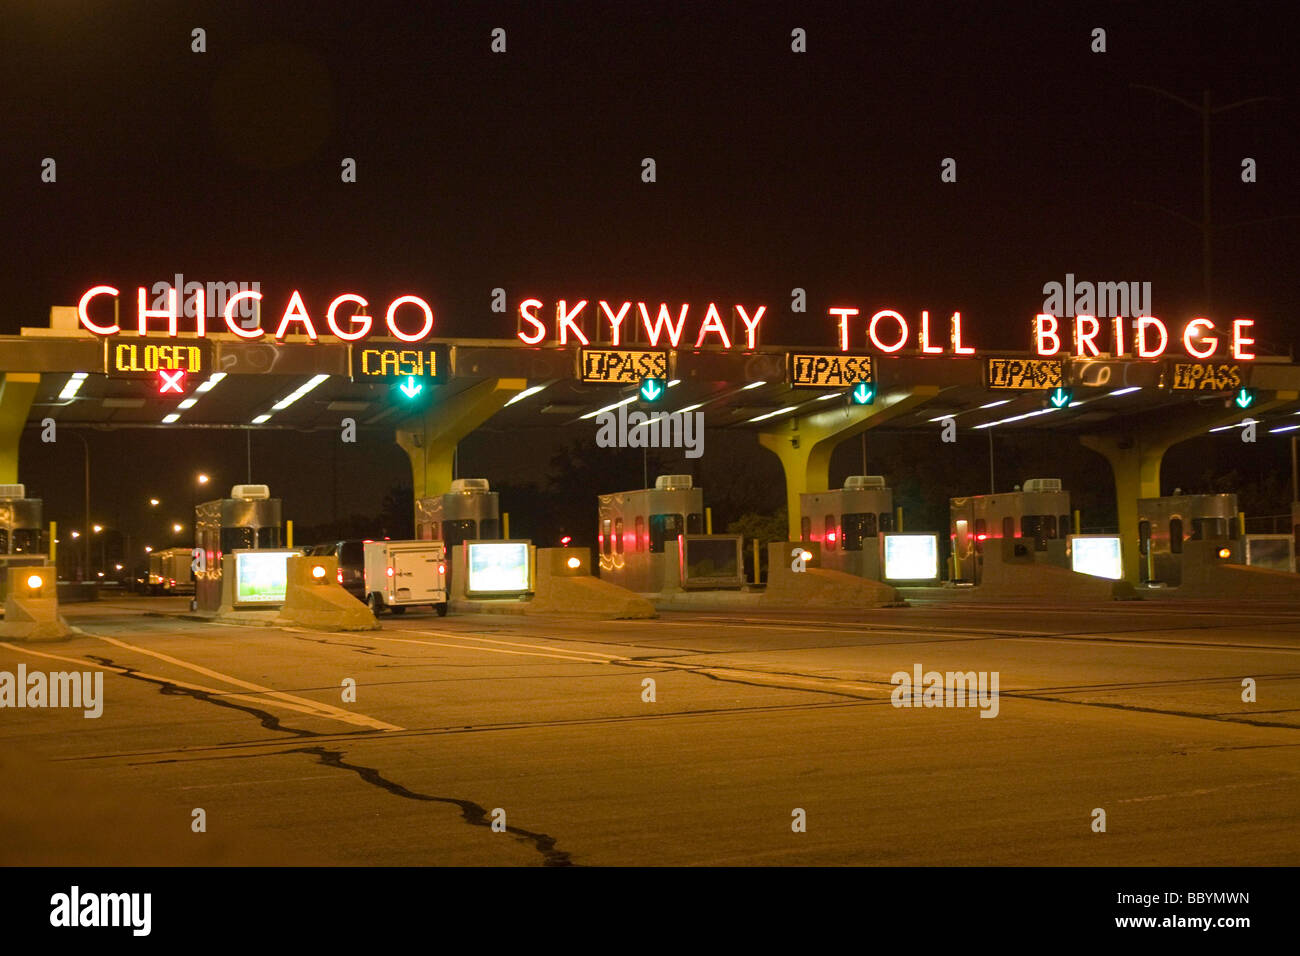 Chicago Skyway toll booths at night Stock Photo, Royalty Free Image